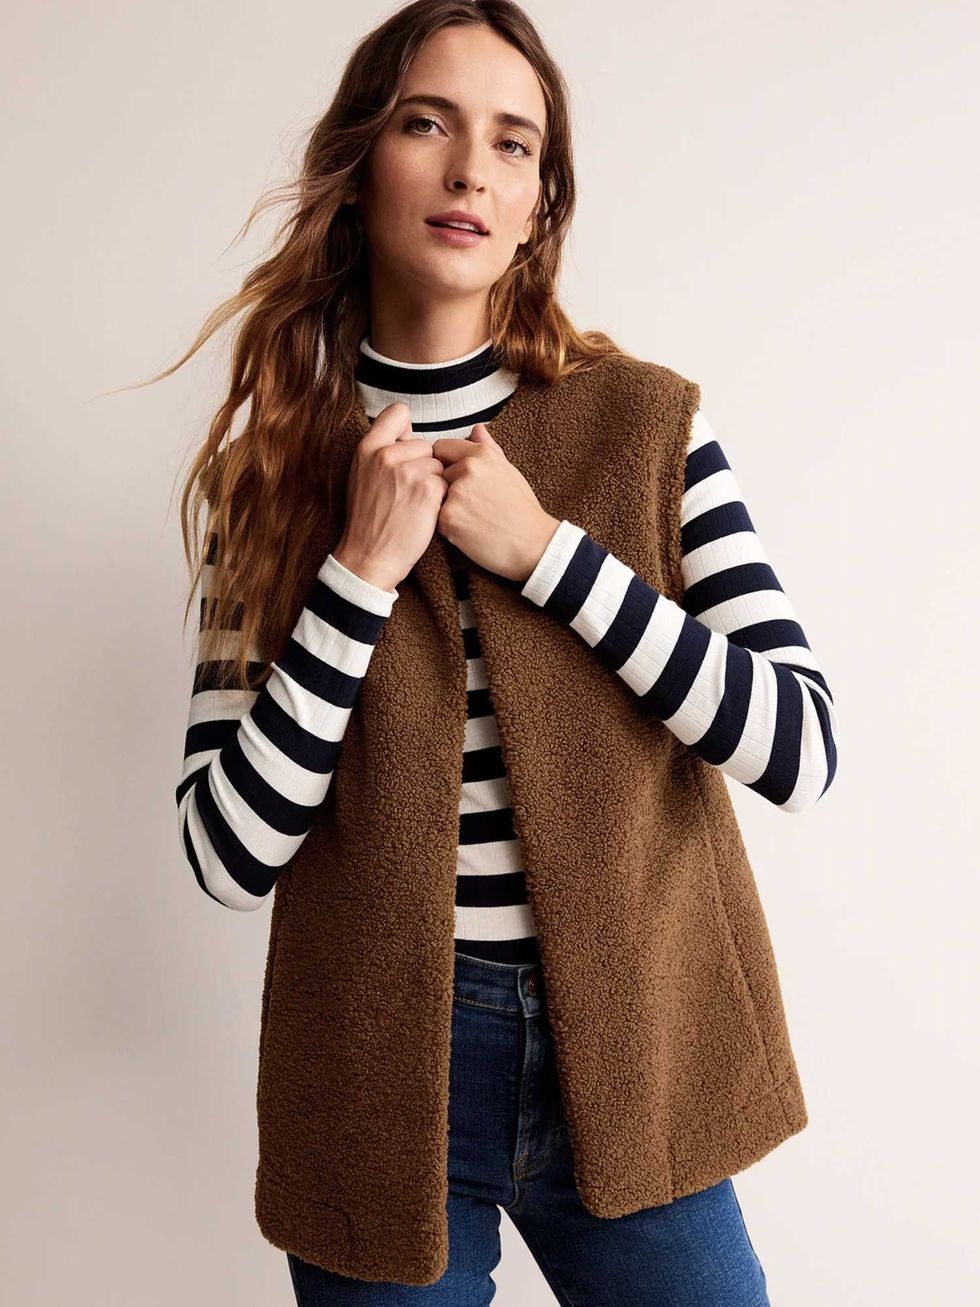 Boden has launched its new Quintessential collection for autumn